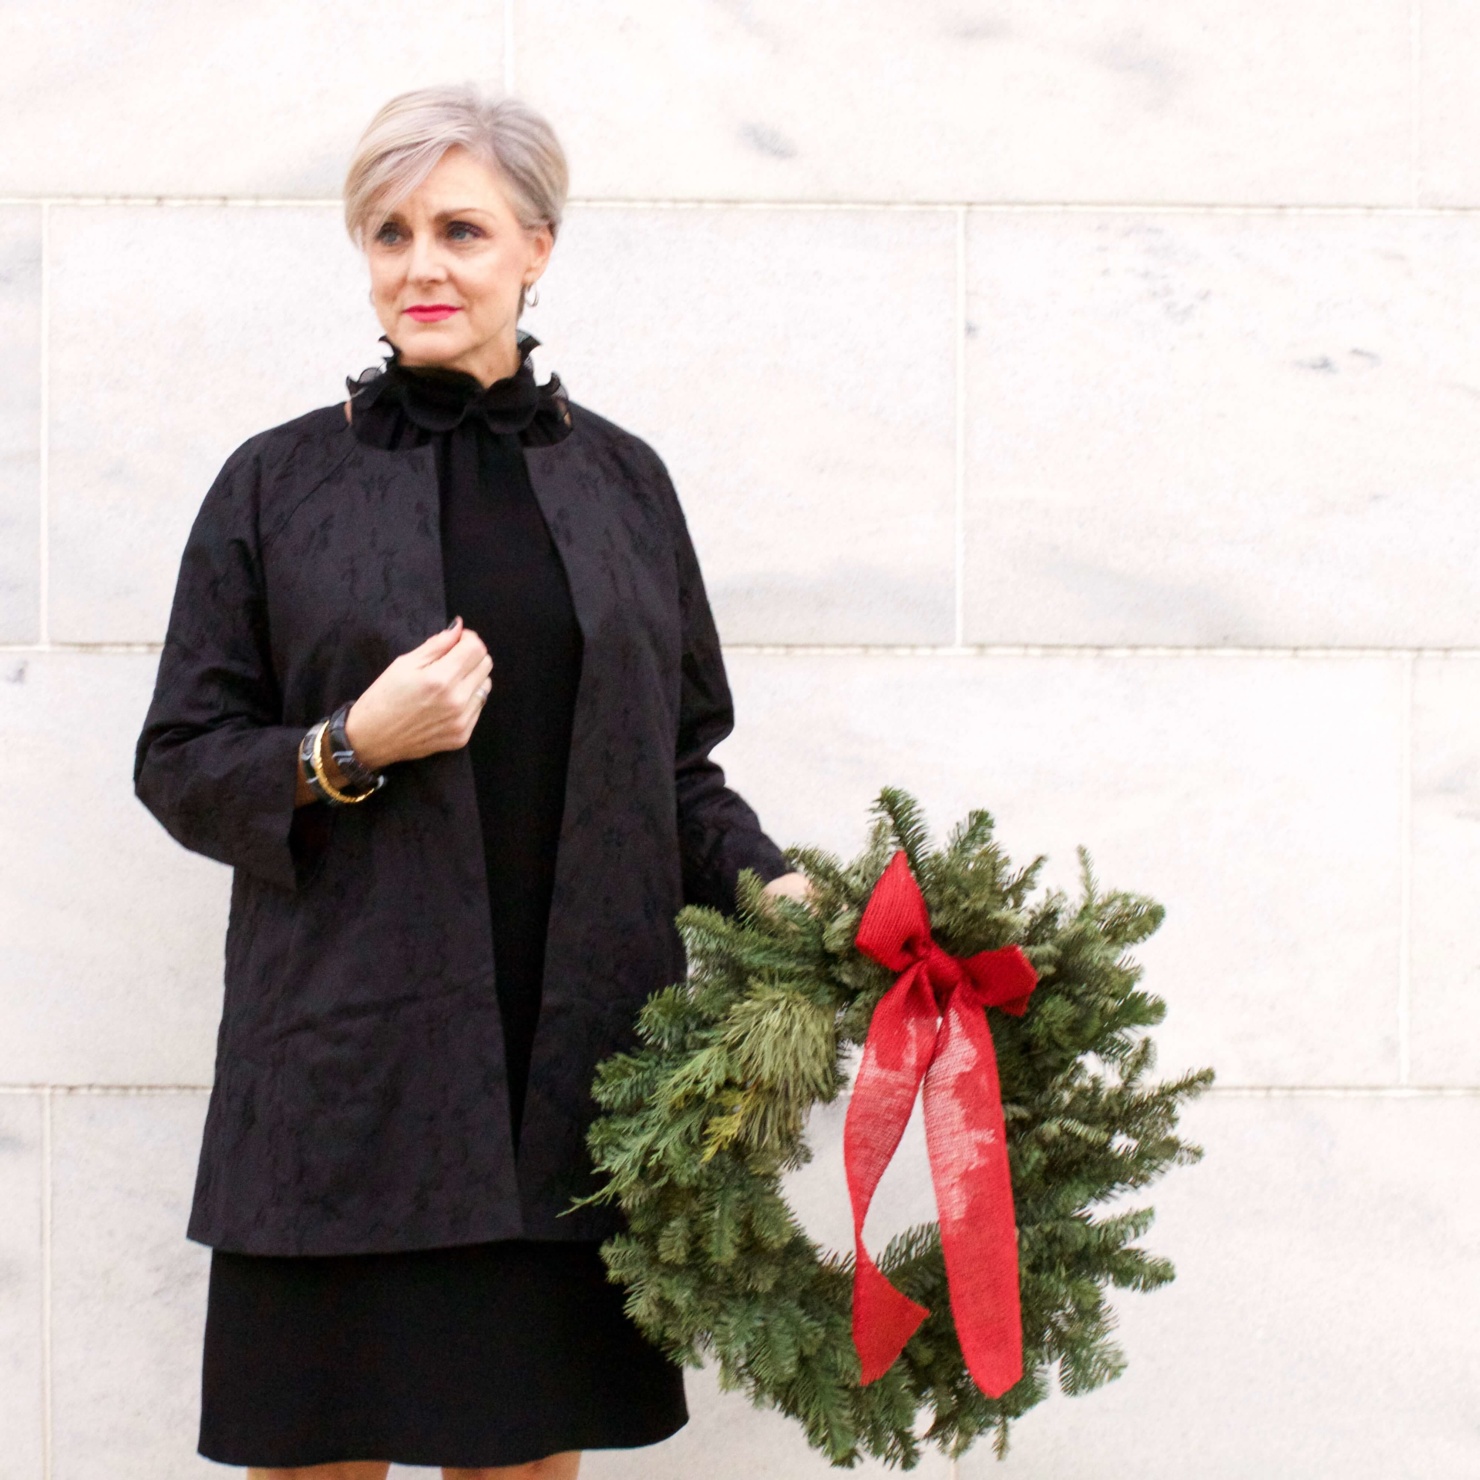 beth from Style at a Certain Age wears a Eileen Fisher shimmer jacquard 3/4 sleeve jacket and ruffled black dress 